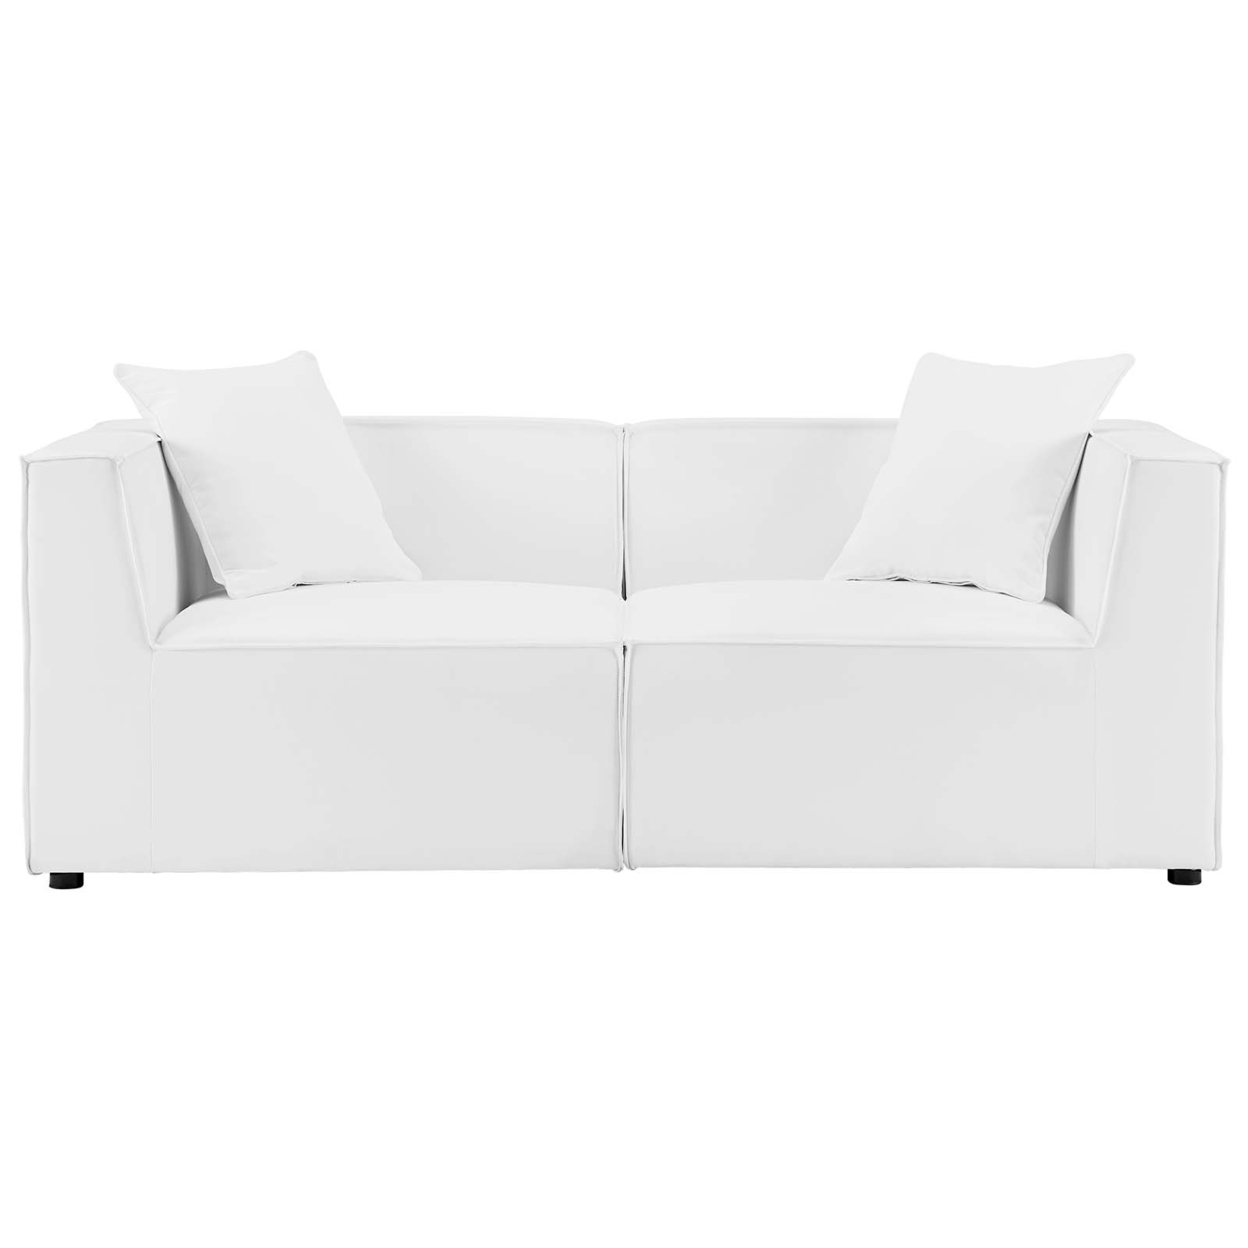 Saybrook Outdoor Patio Upholstered 2-Piece Sectional Sofa Loveseat, White